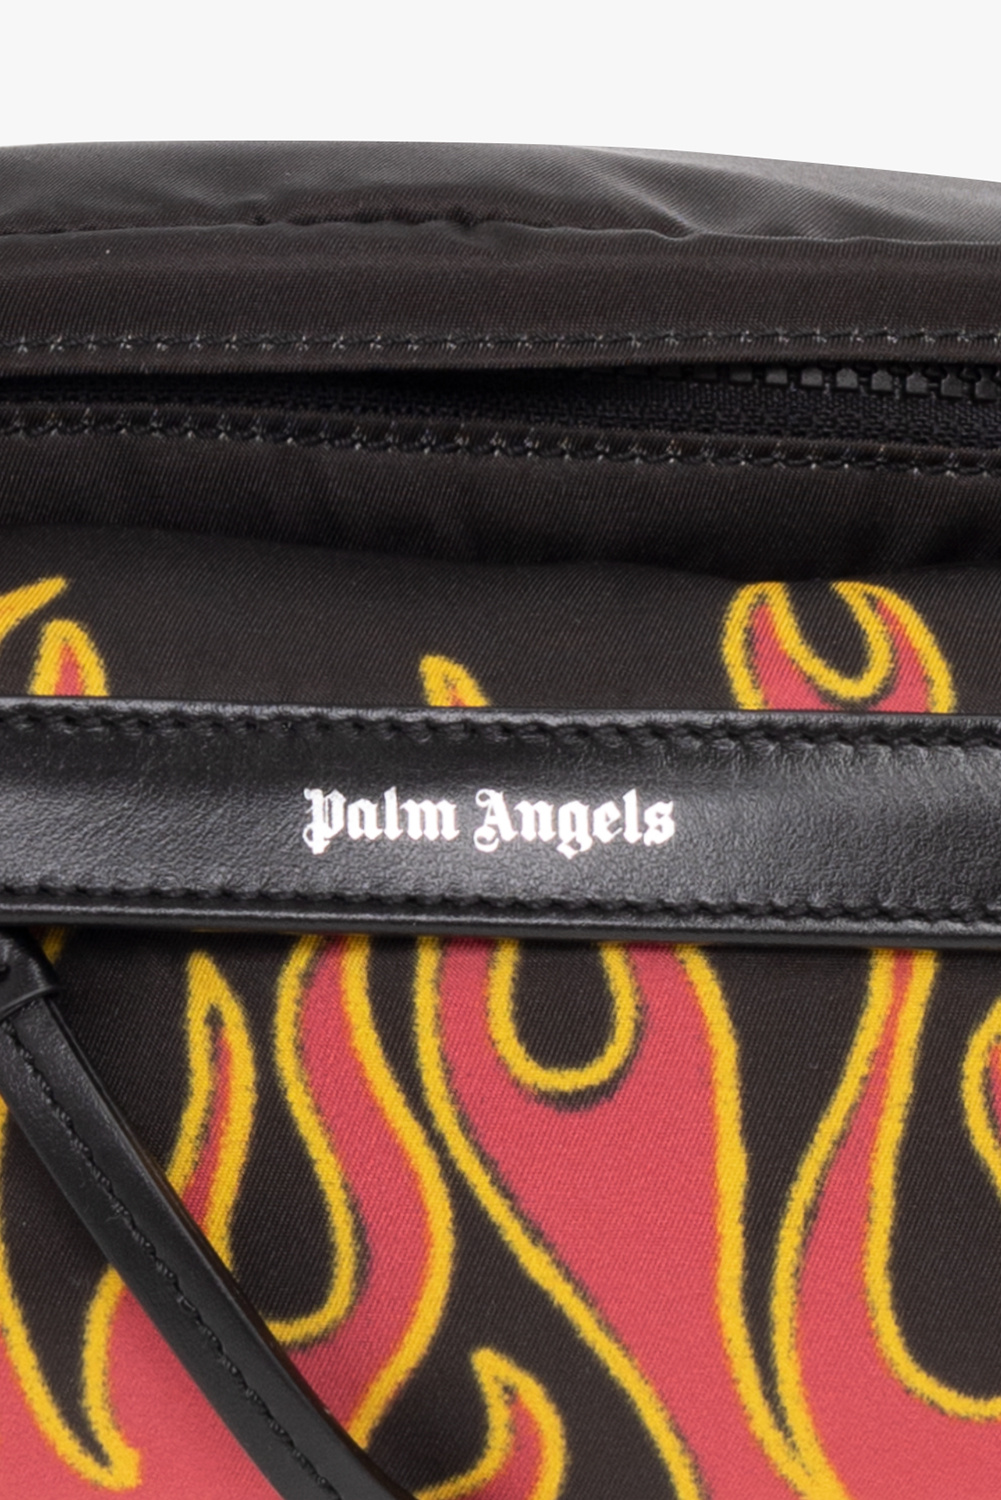 Palm Angels Soft Campus Bp40 Backpack